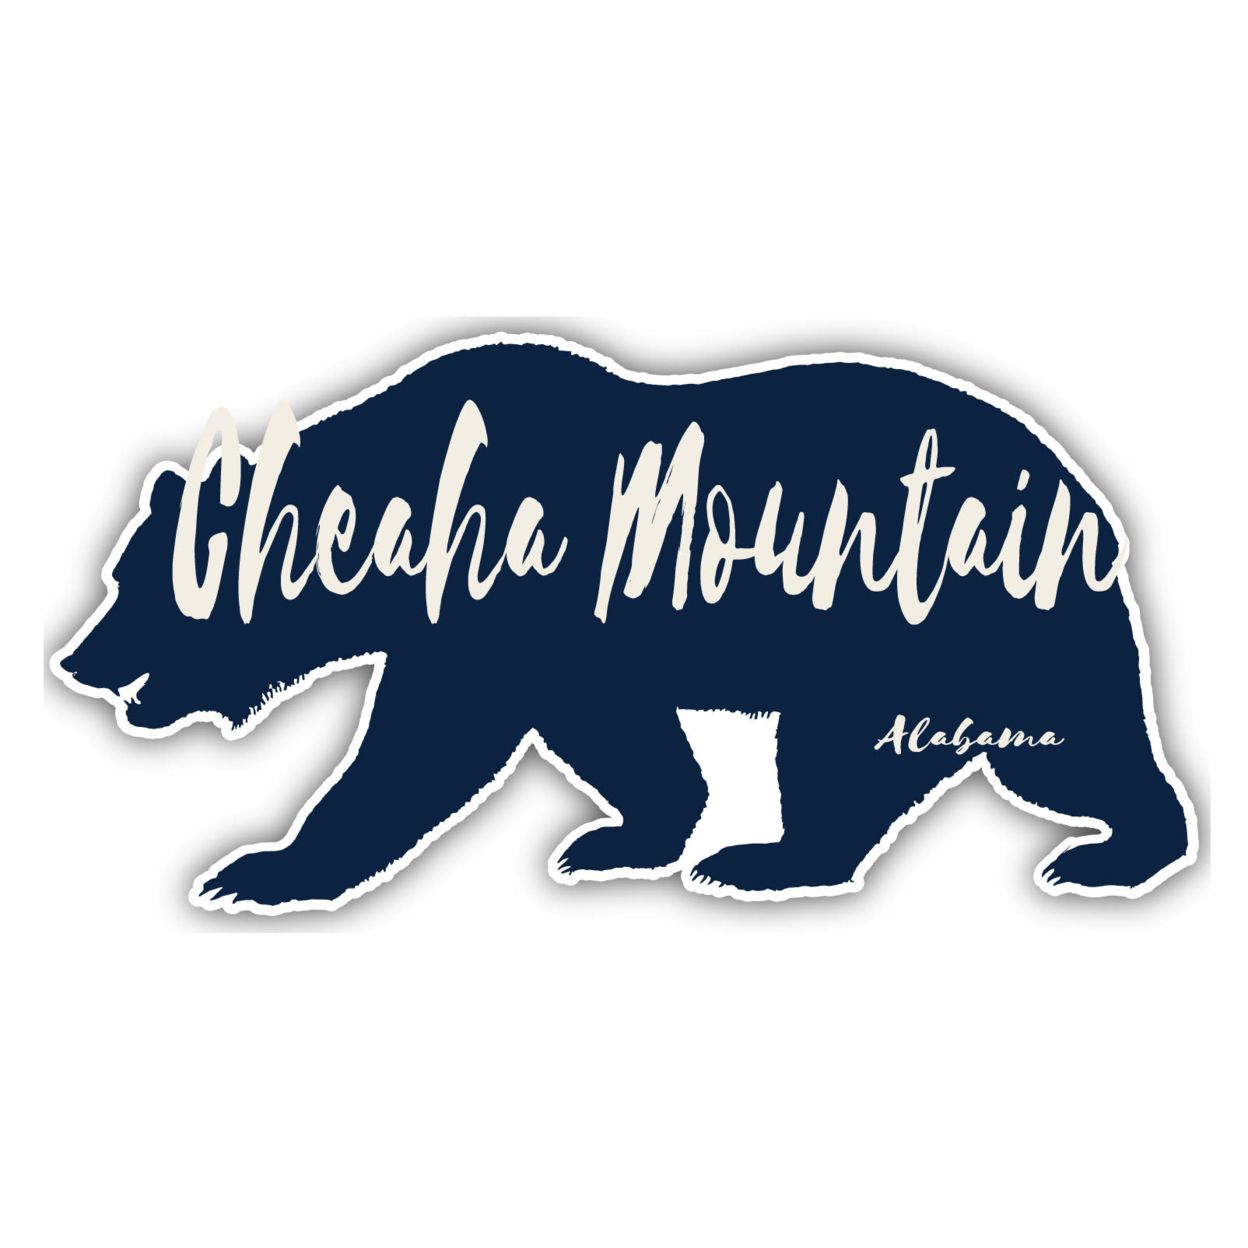 Cheaha Mountain Alabama Souvenir Decorative Stickers (Choose Theme And Size) - 4-Pack, 12-Inch, Bear